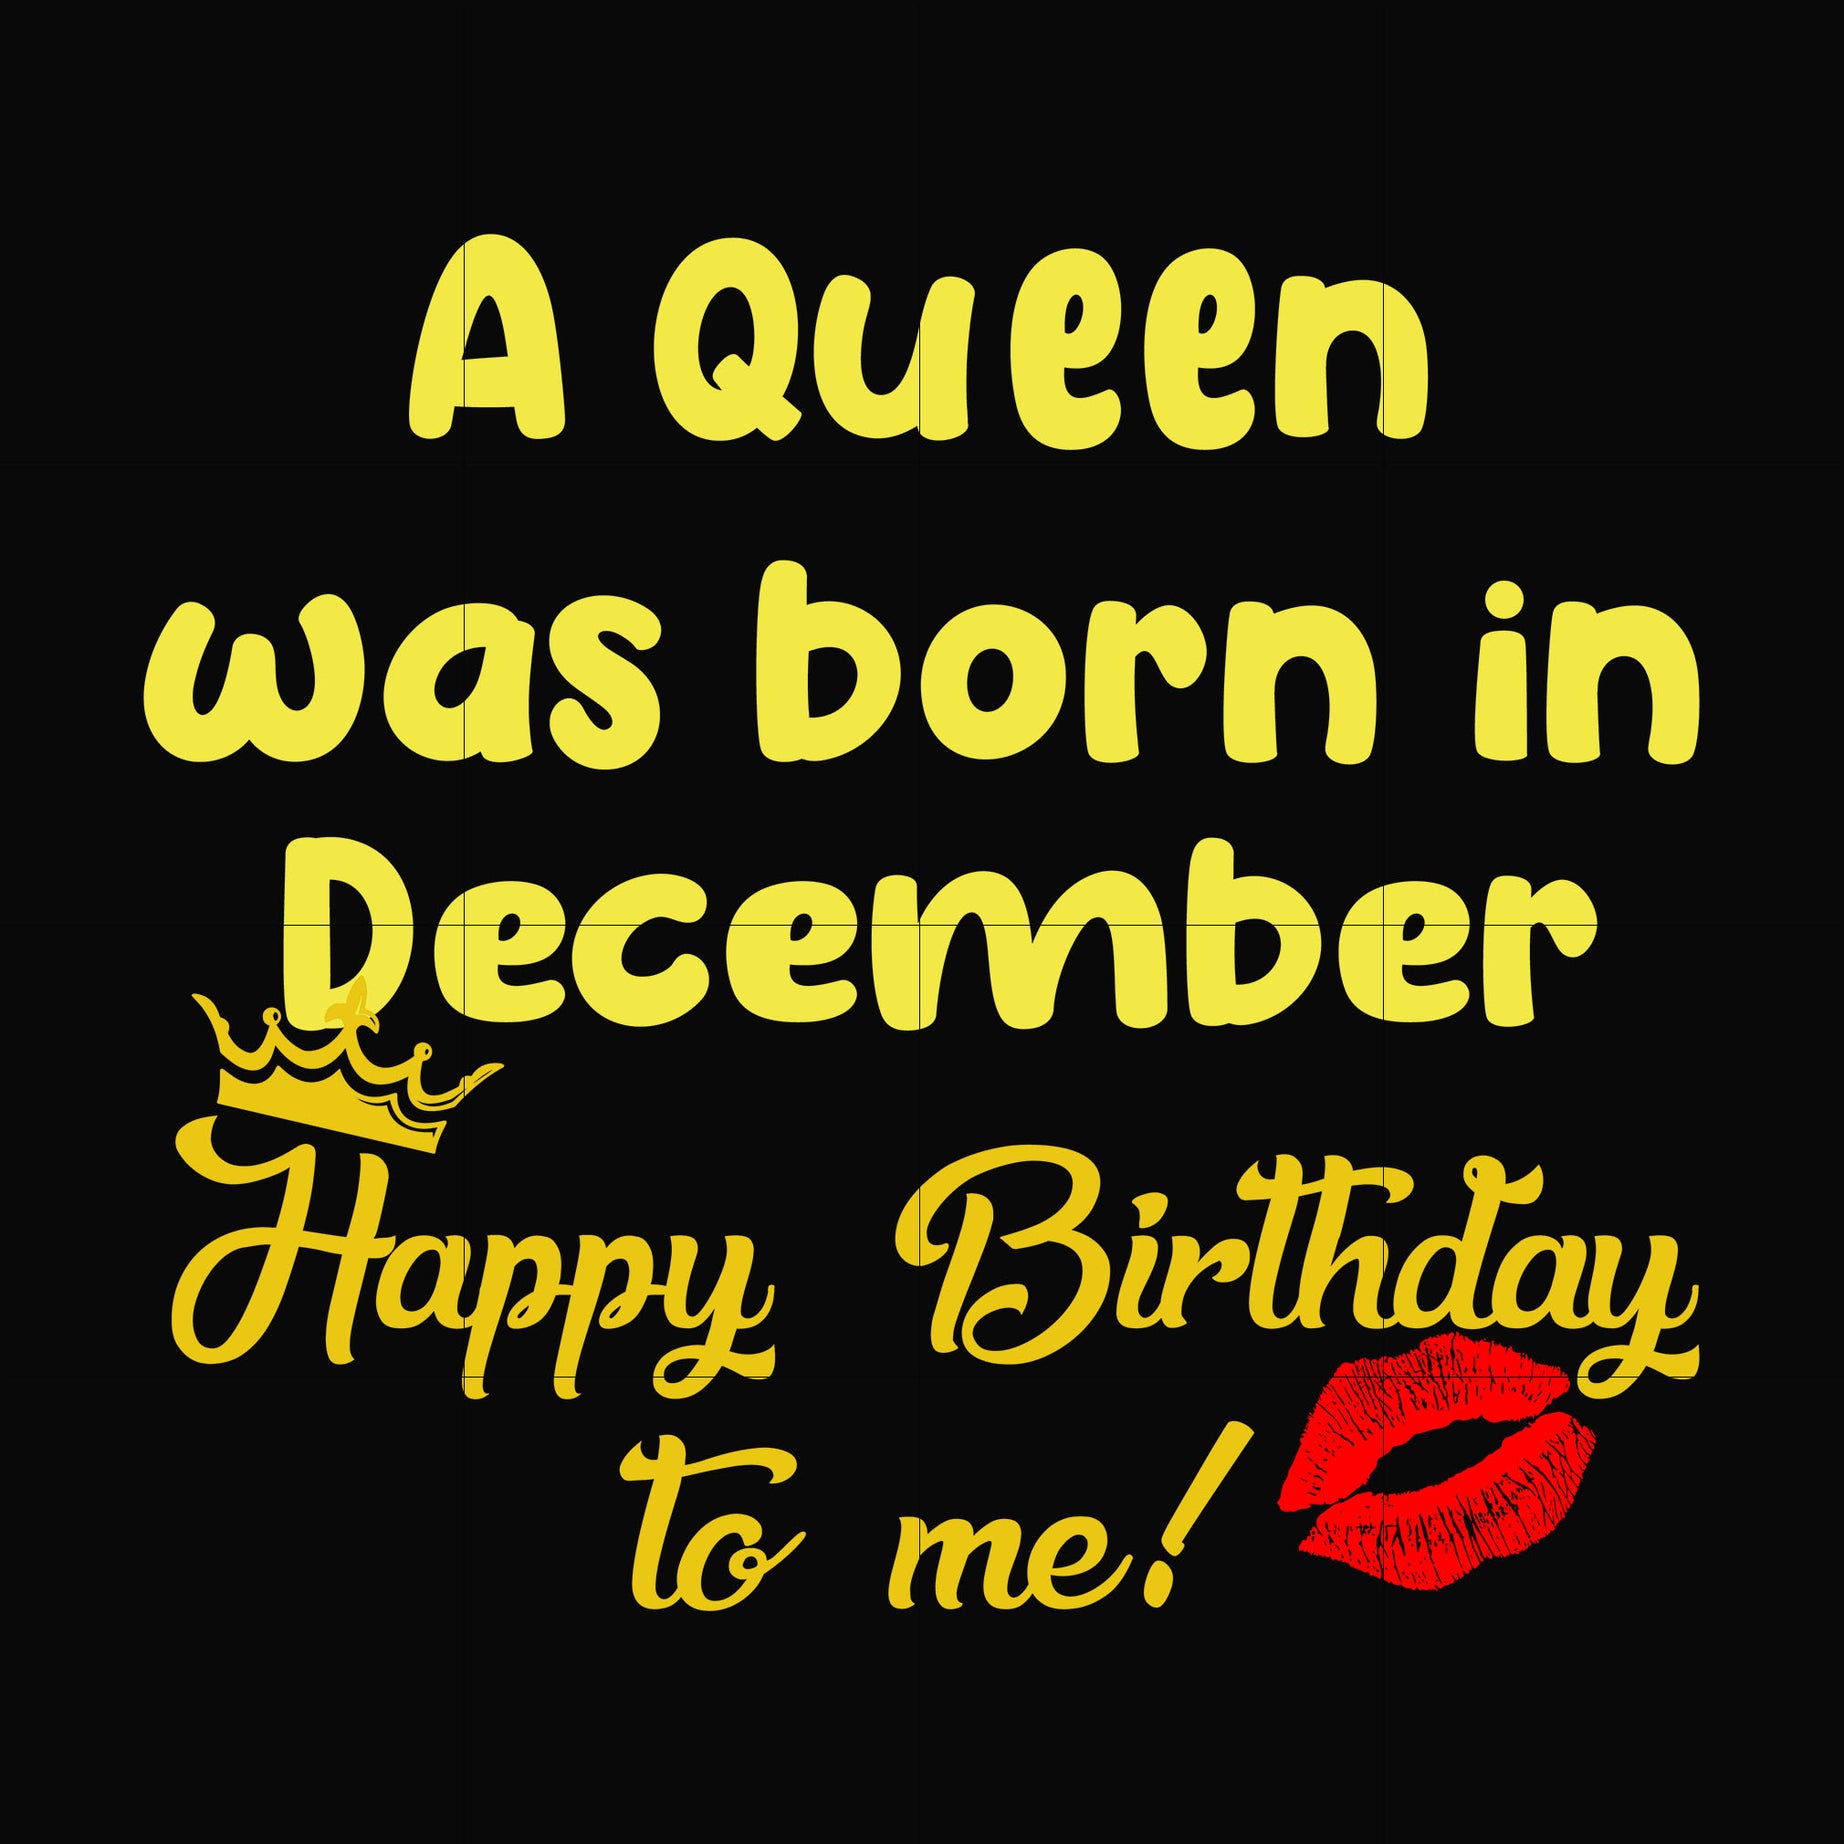 A queen was born in December happy birthday to me svg, png, dxf, eps digital file BD0072